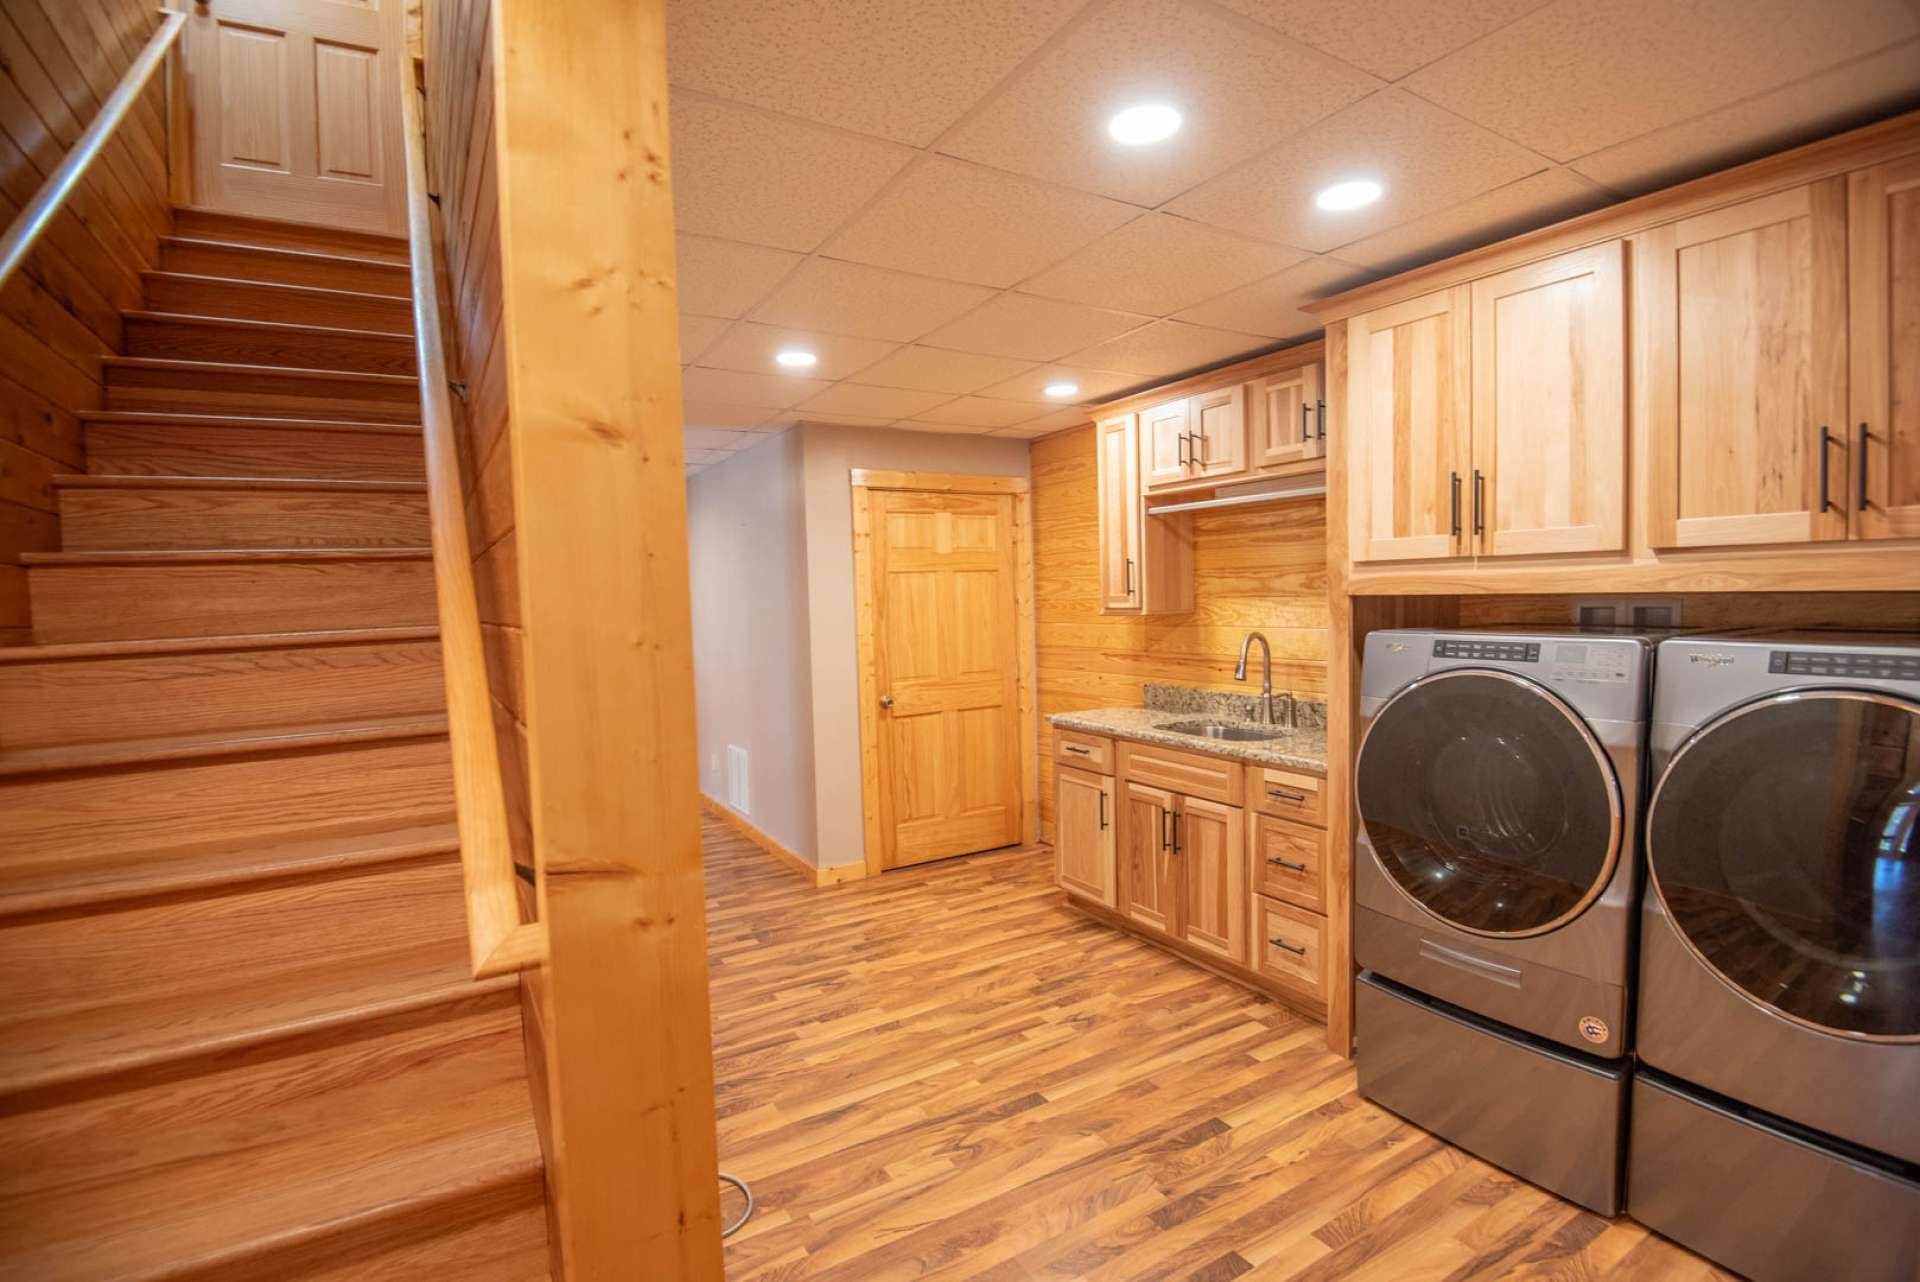 Spacious laundry area on lower level